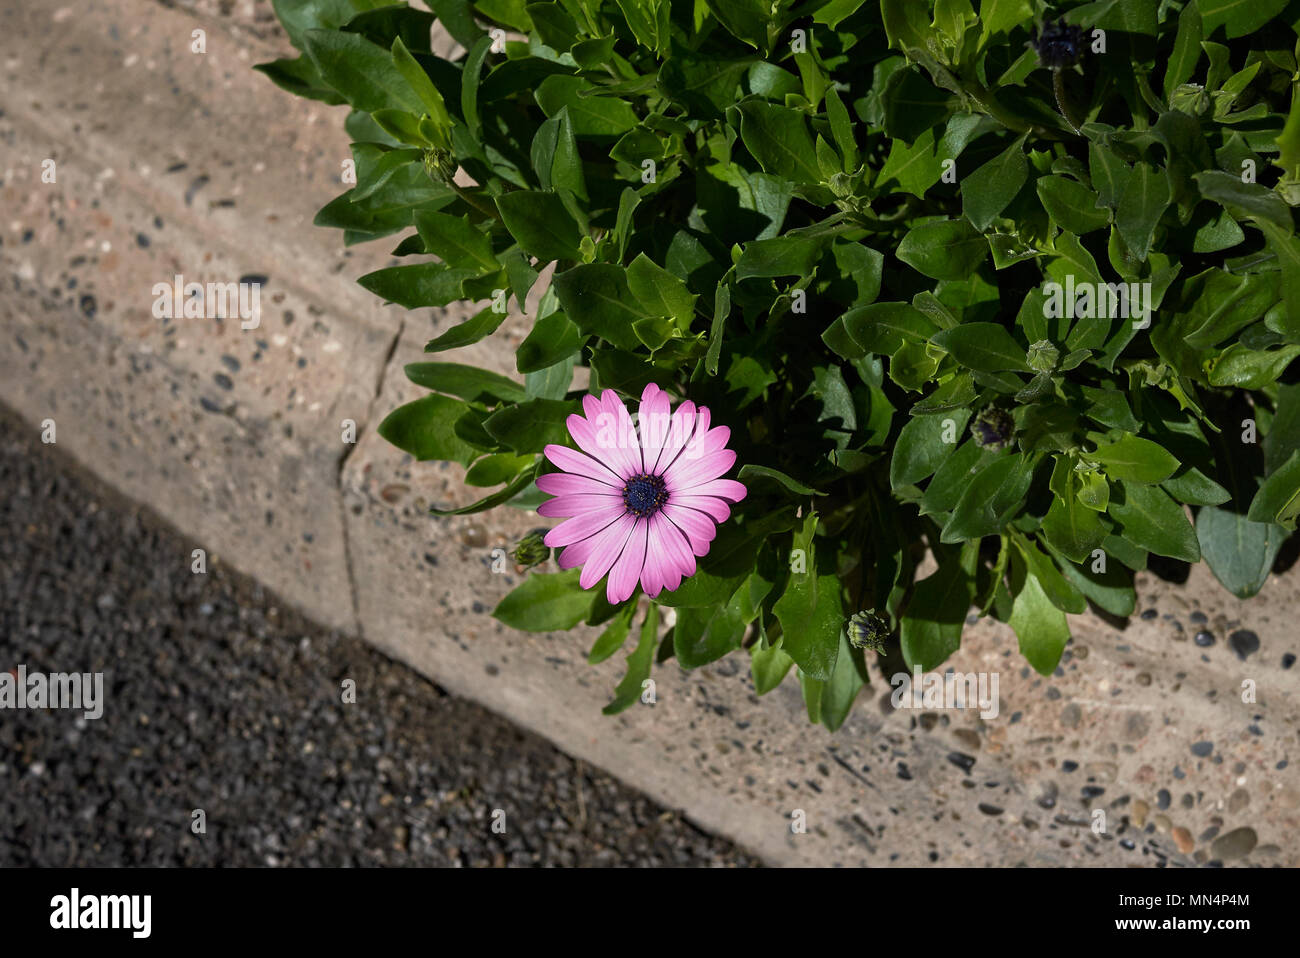 Dimorphotheca pluvialis in a flowerbed Stock Photo